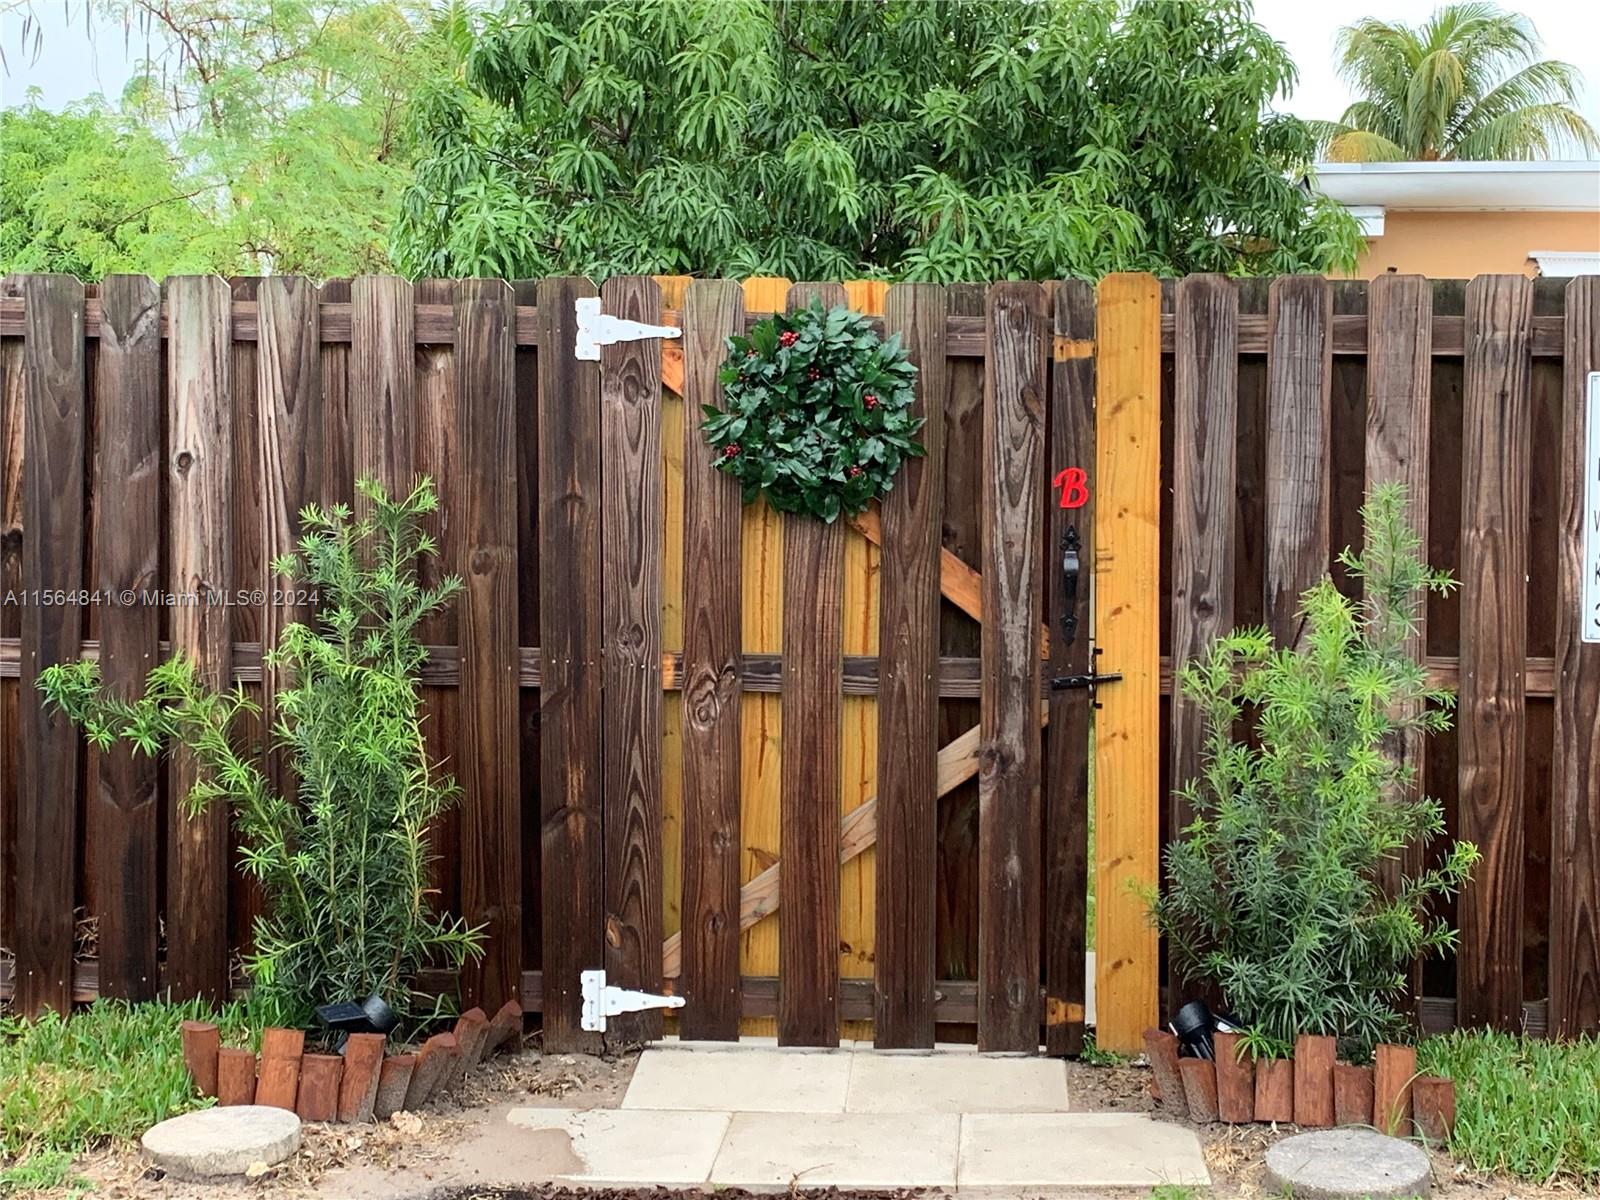 a view of a garden with wooden fence